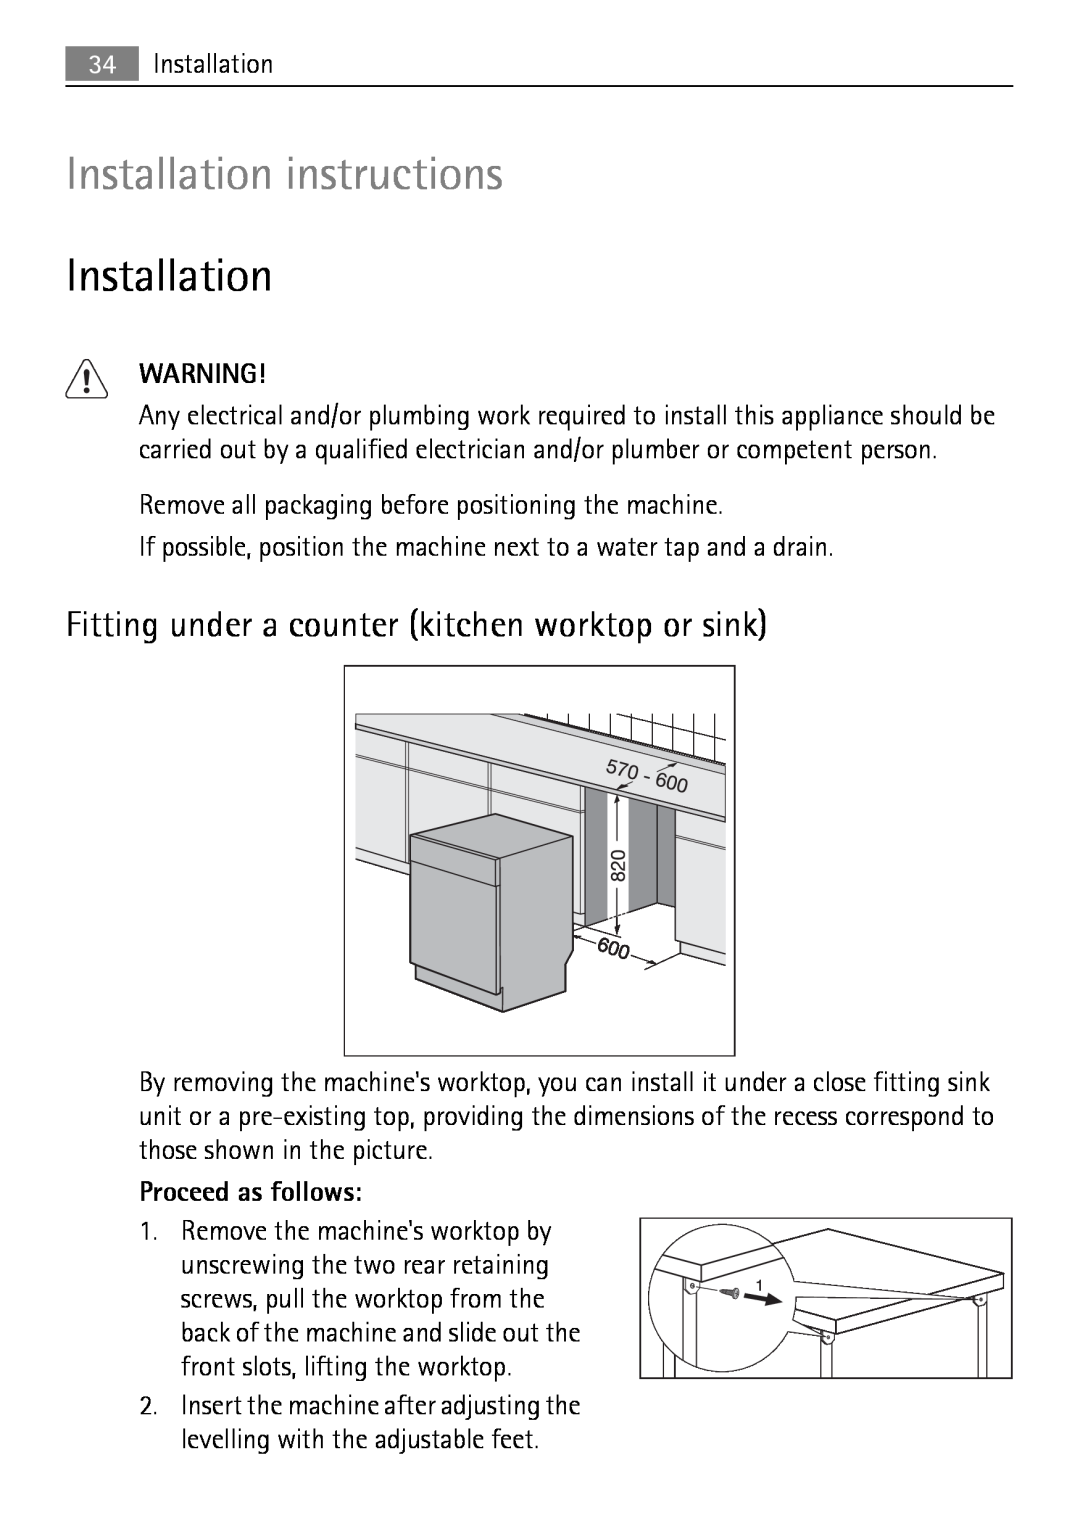 Electrolux 50870 user manual Installation instructions, Fitting under a counter kitchen worktop or sink, Proceed as follows 